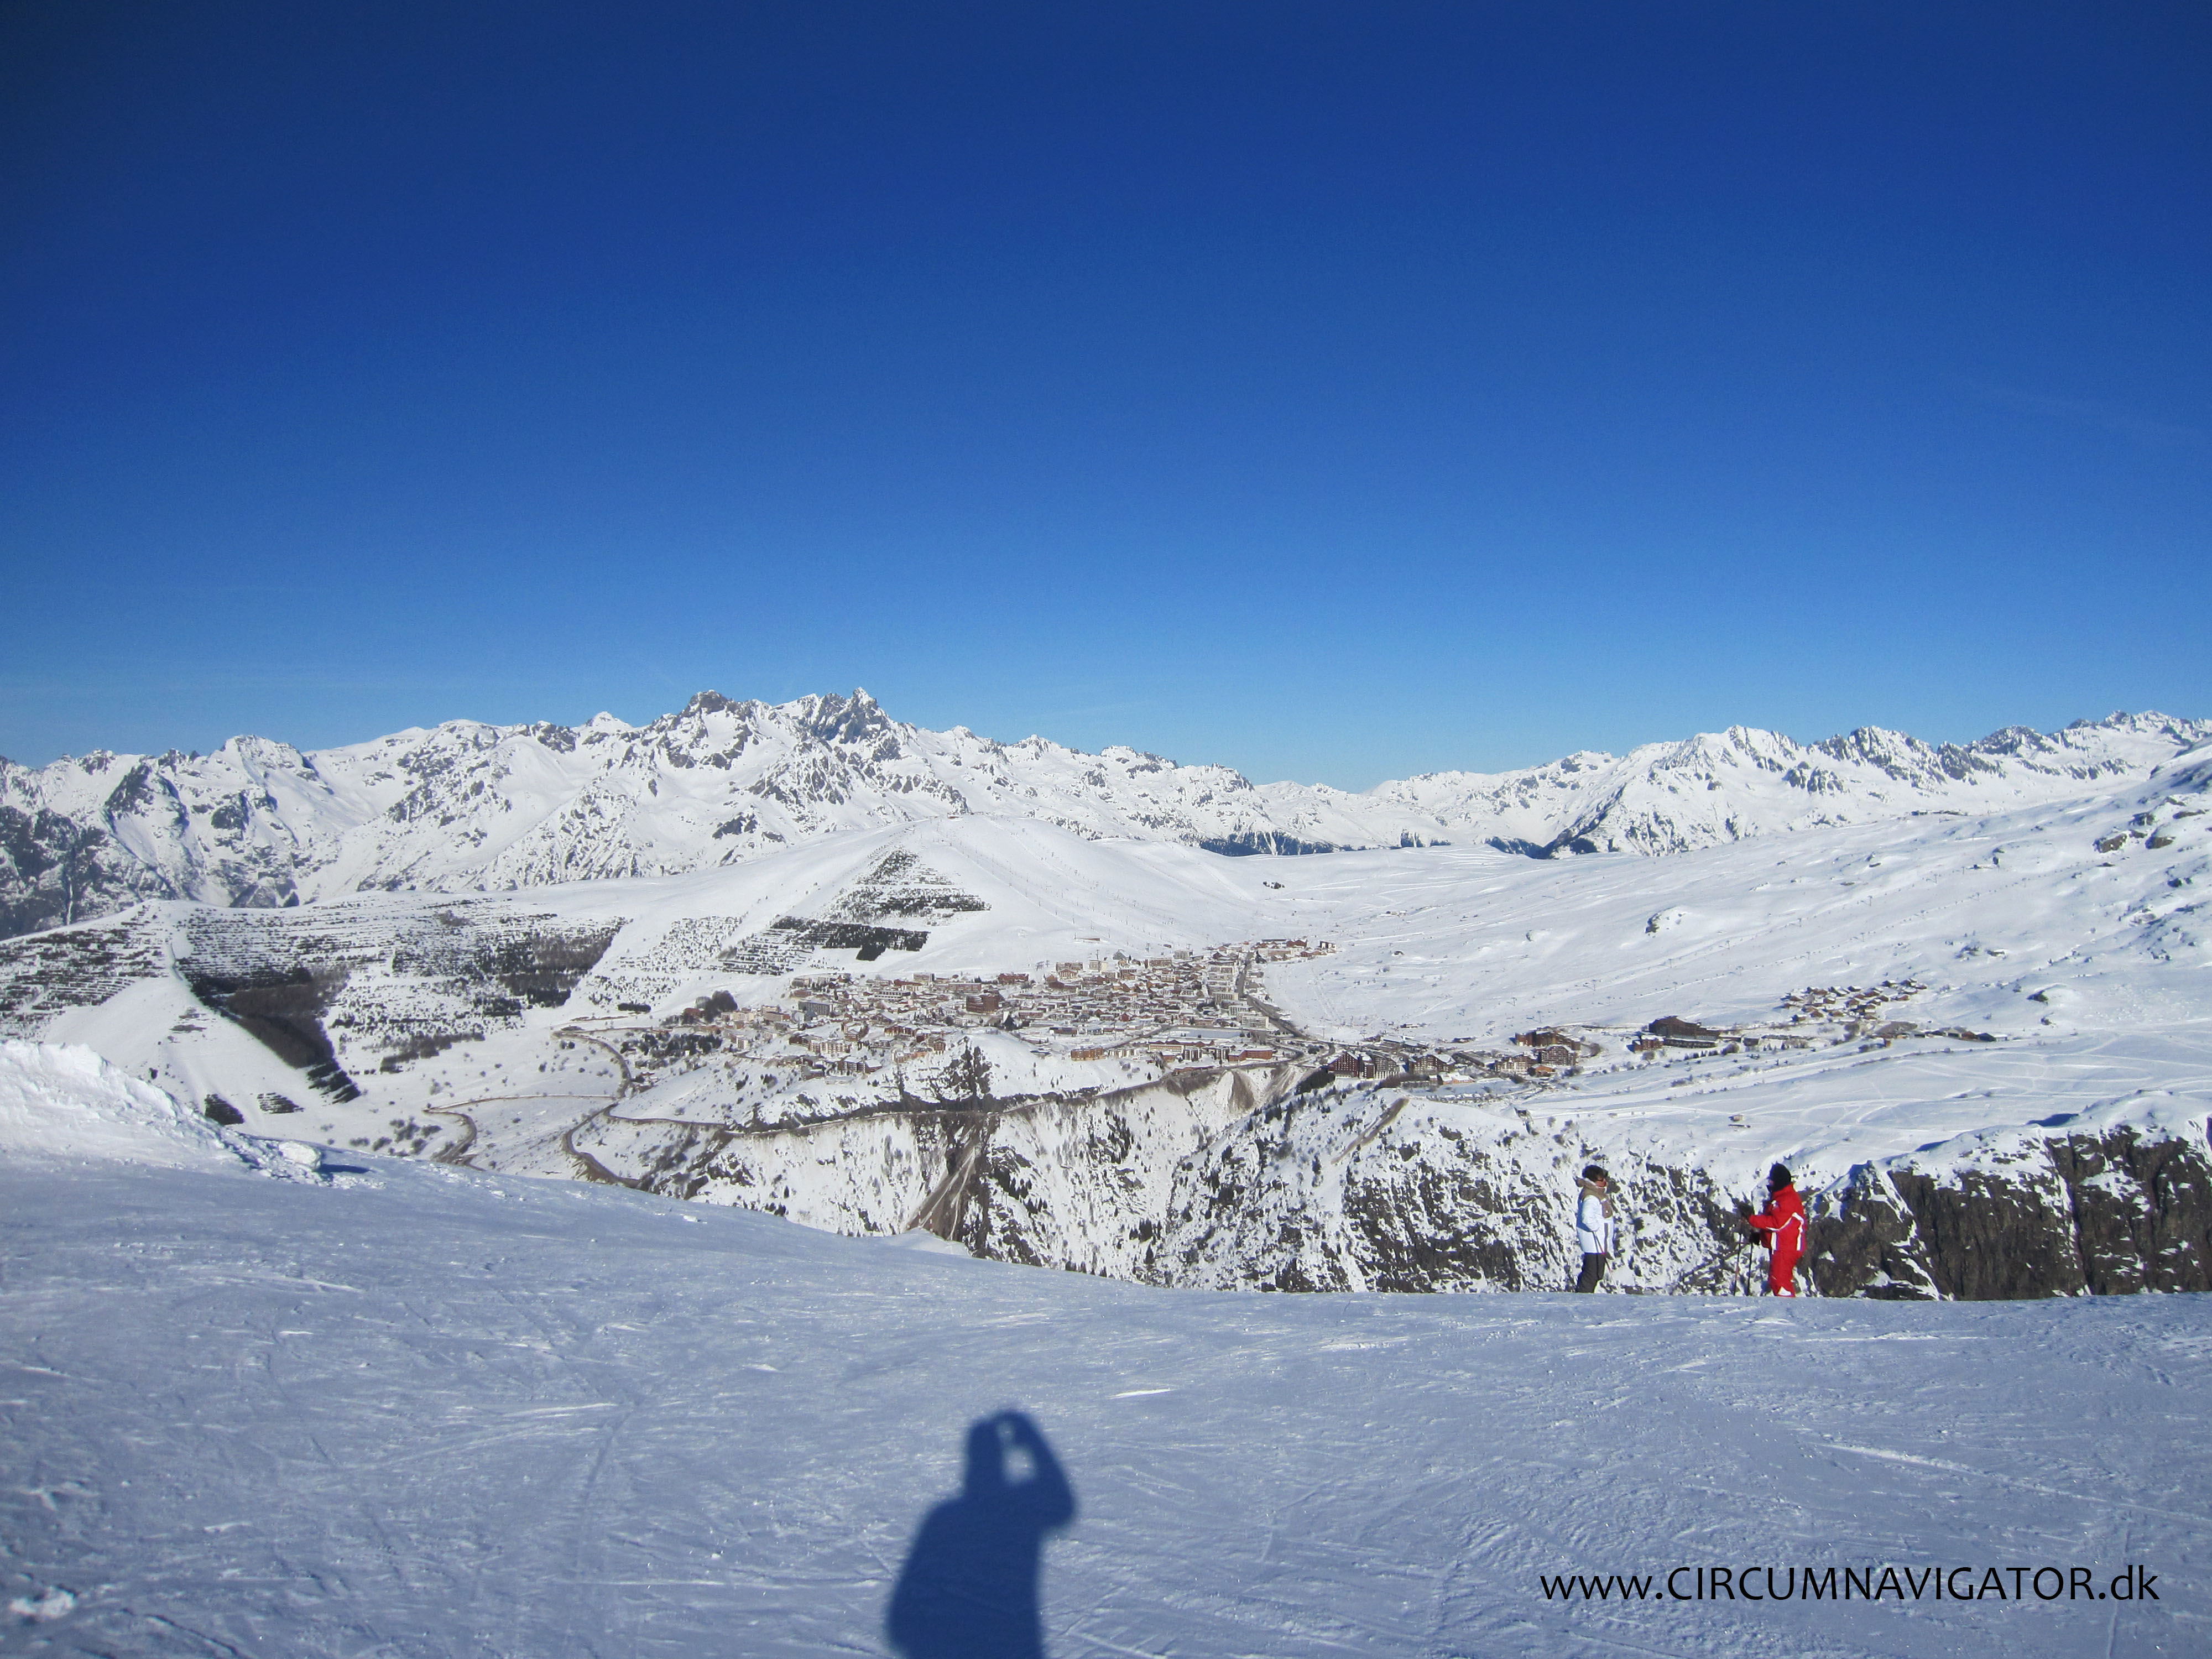 Alpe d’Huez – not only for Tour de France bike riders, also for down hill skiers